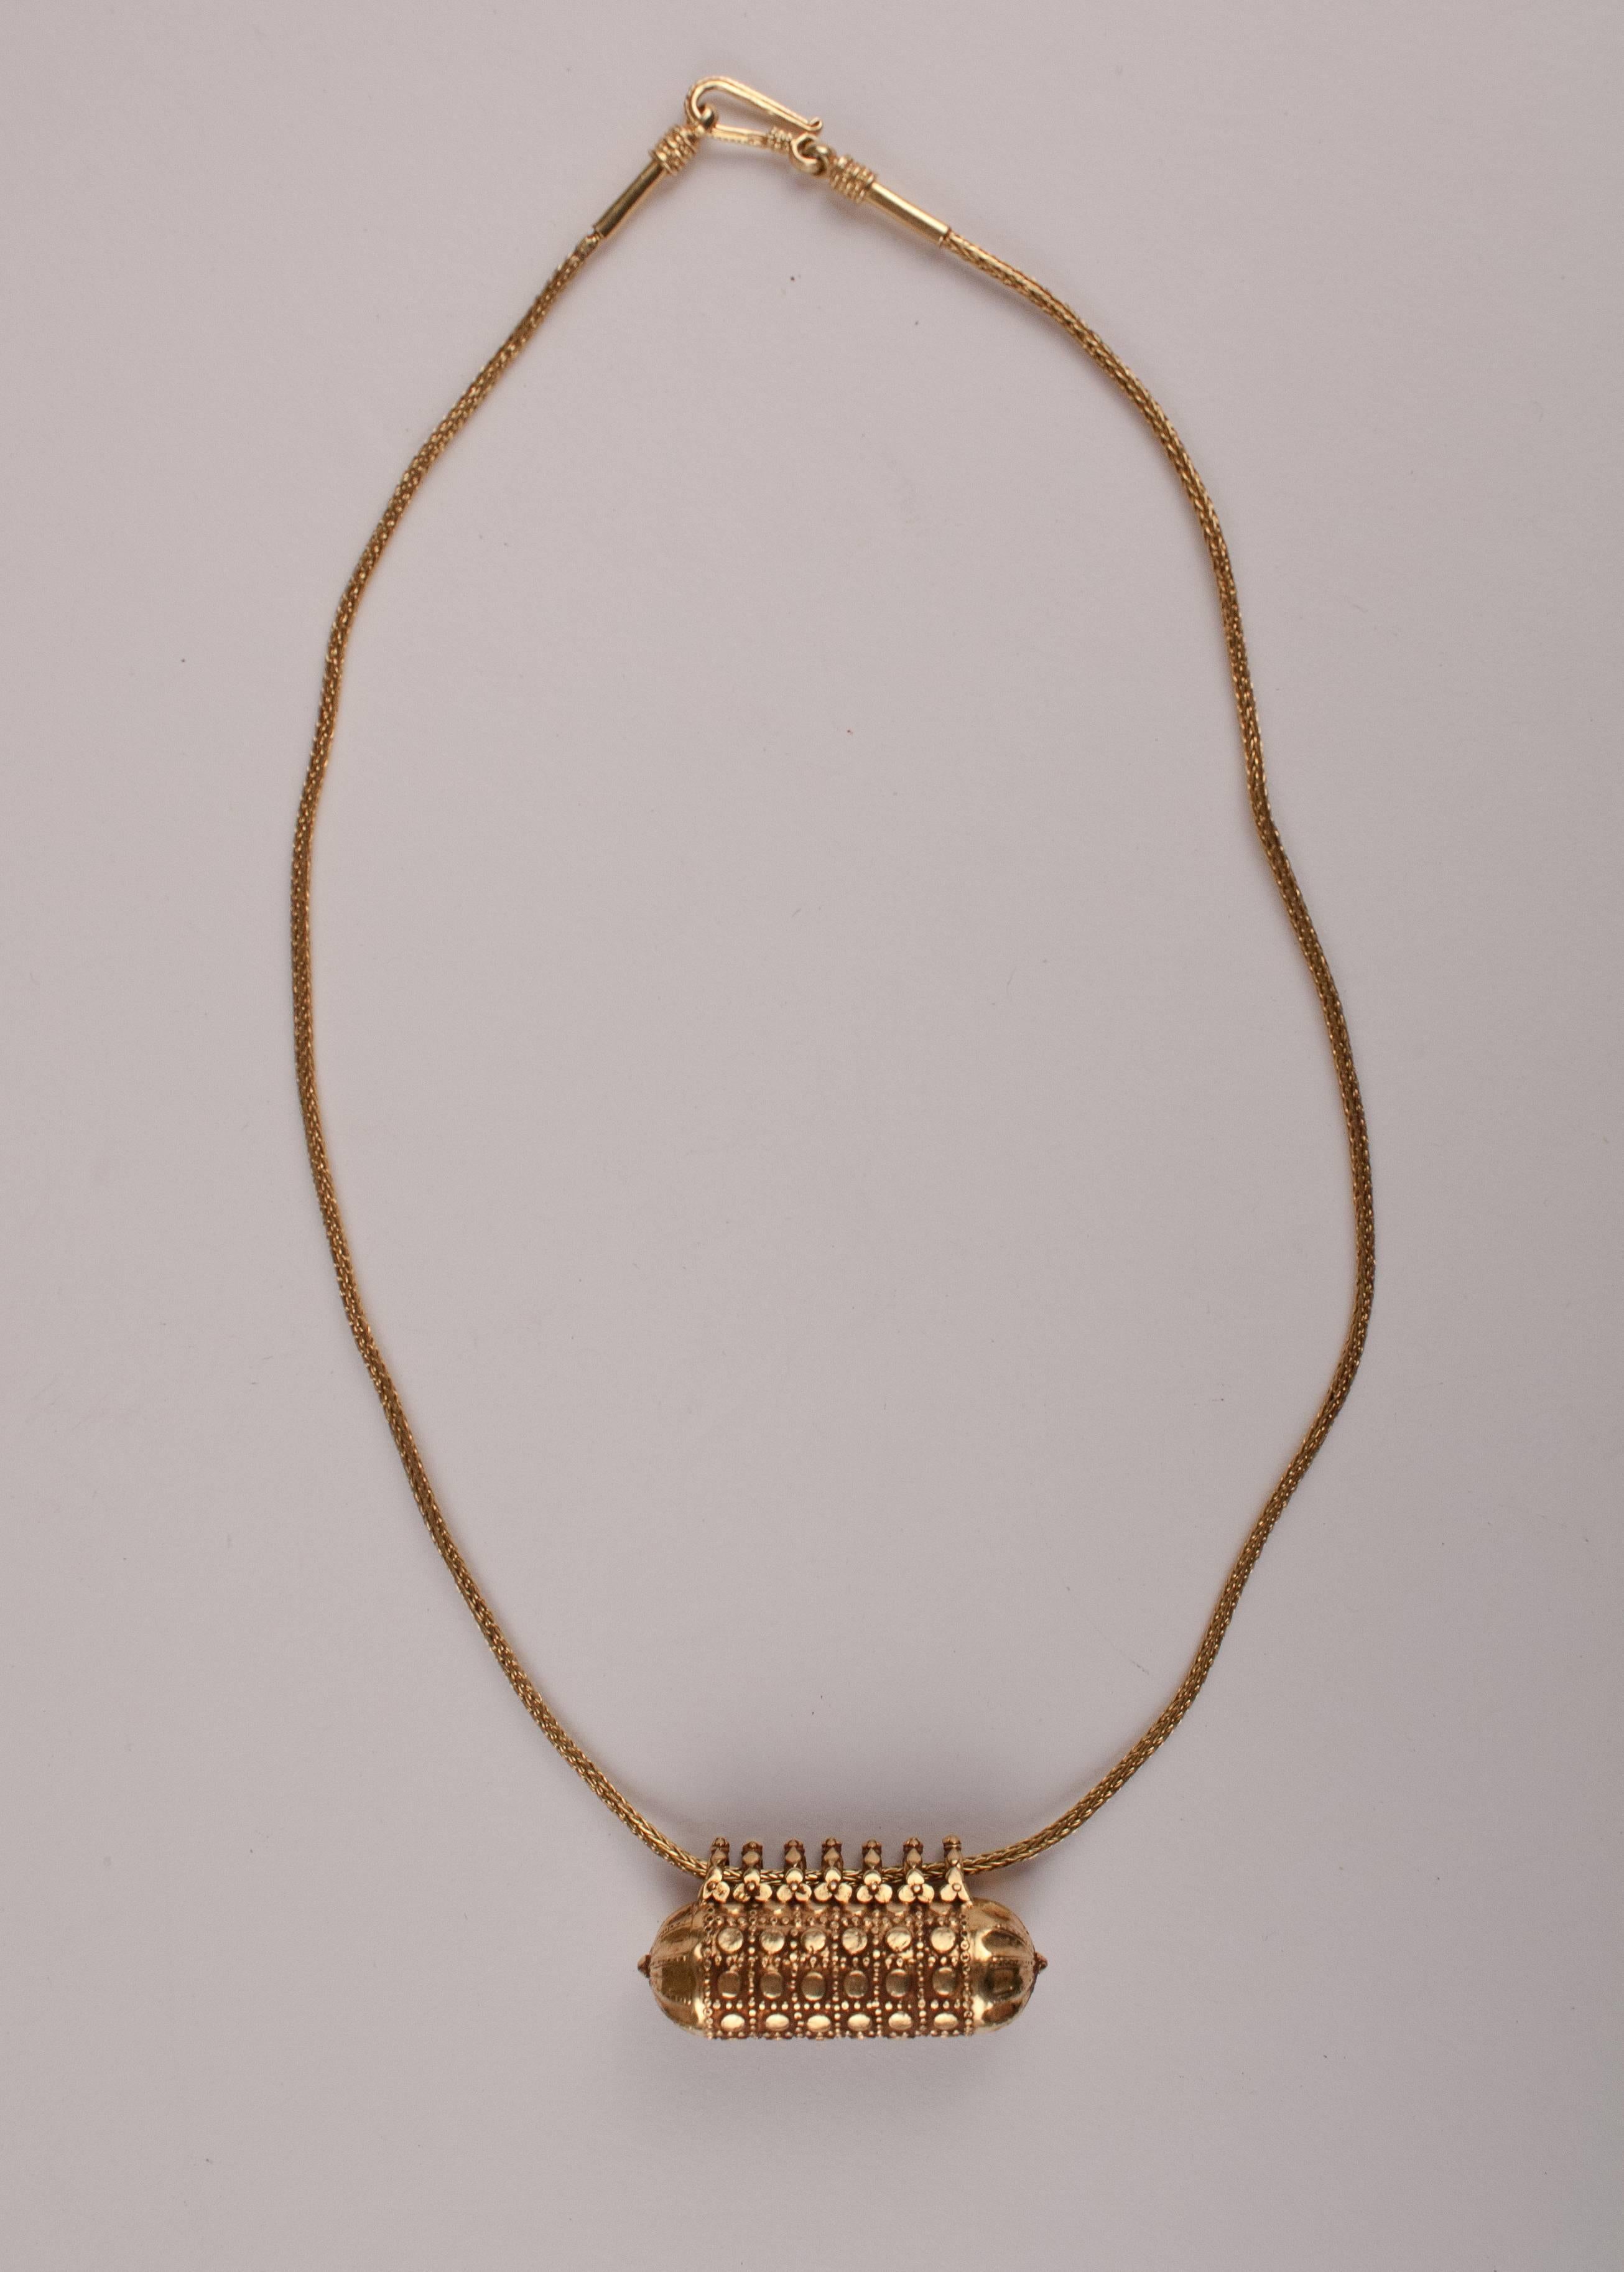 A special 18-karat gold amulet from India with a pleasing patina and tasteful granulation work, including floral details on each of the seven suspension loops. This capsule bead, which does not open, hangs from a contemporary 18-karat gold chain